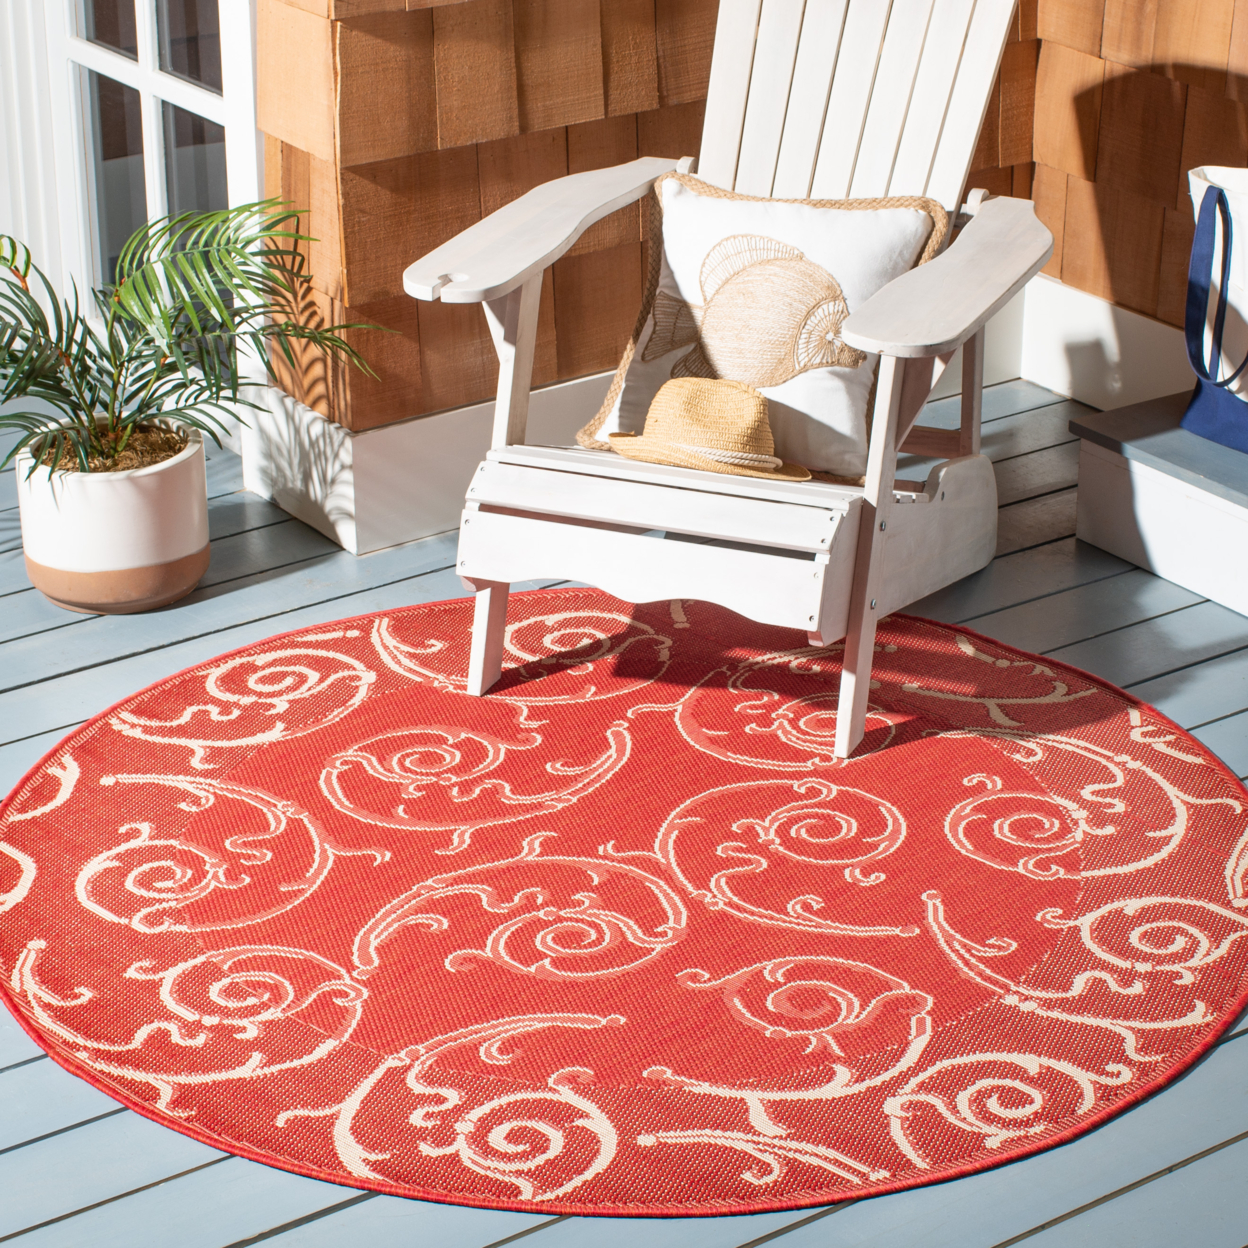 SAFAVIEH Outdoor CY2665-3707 Courtyard Red / Natural Rug - 2' 3 X 6' 7